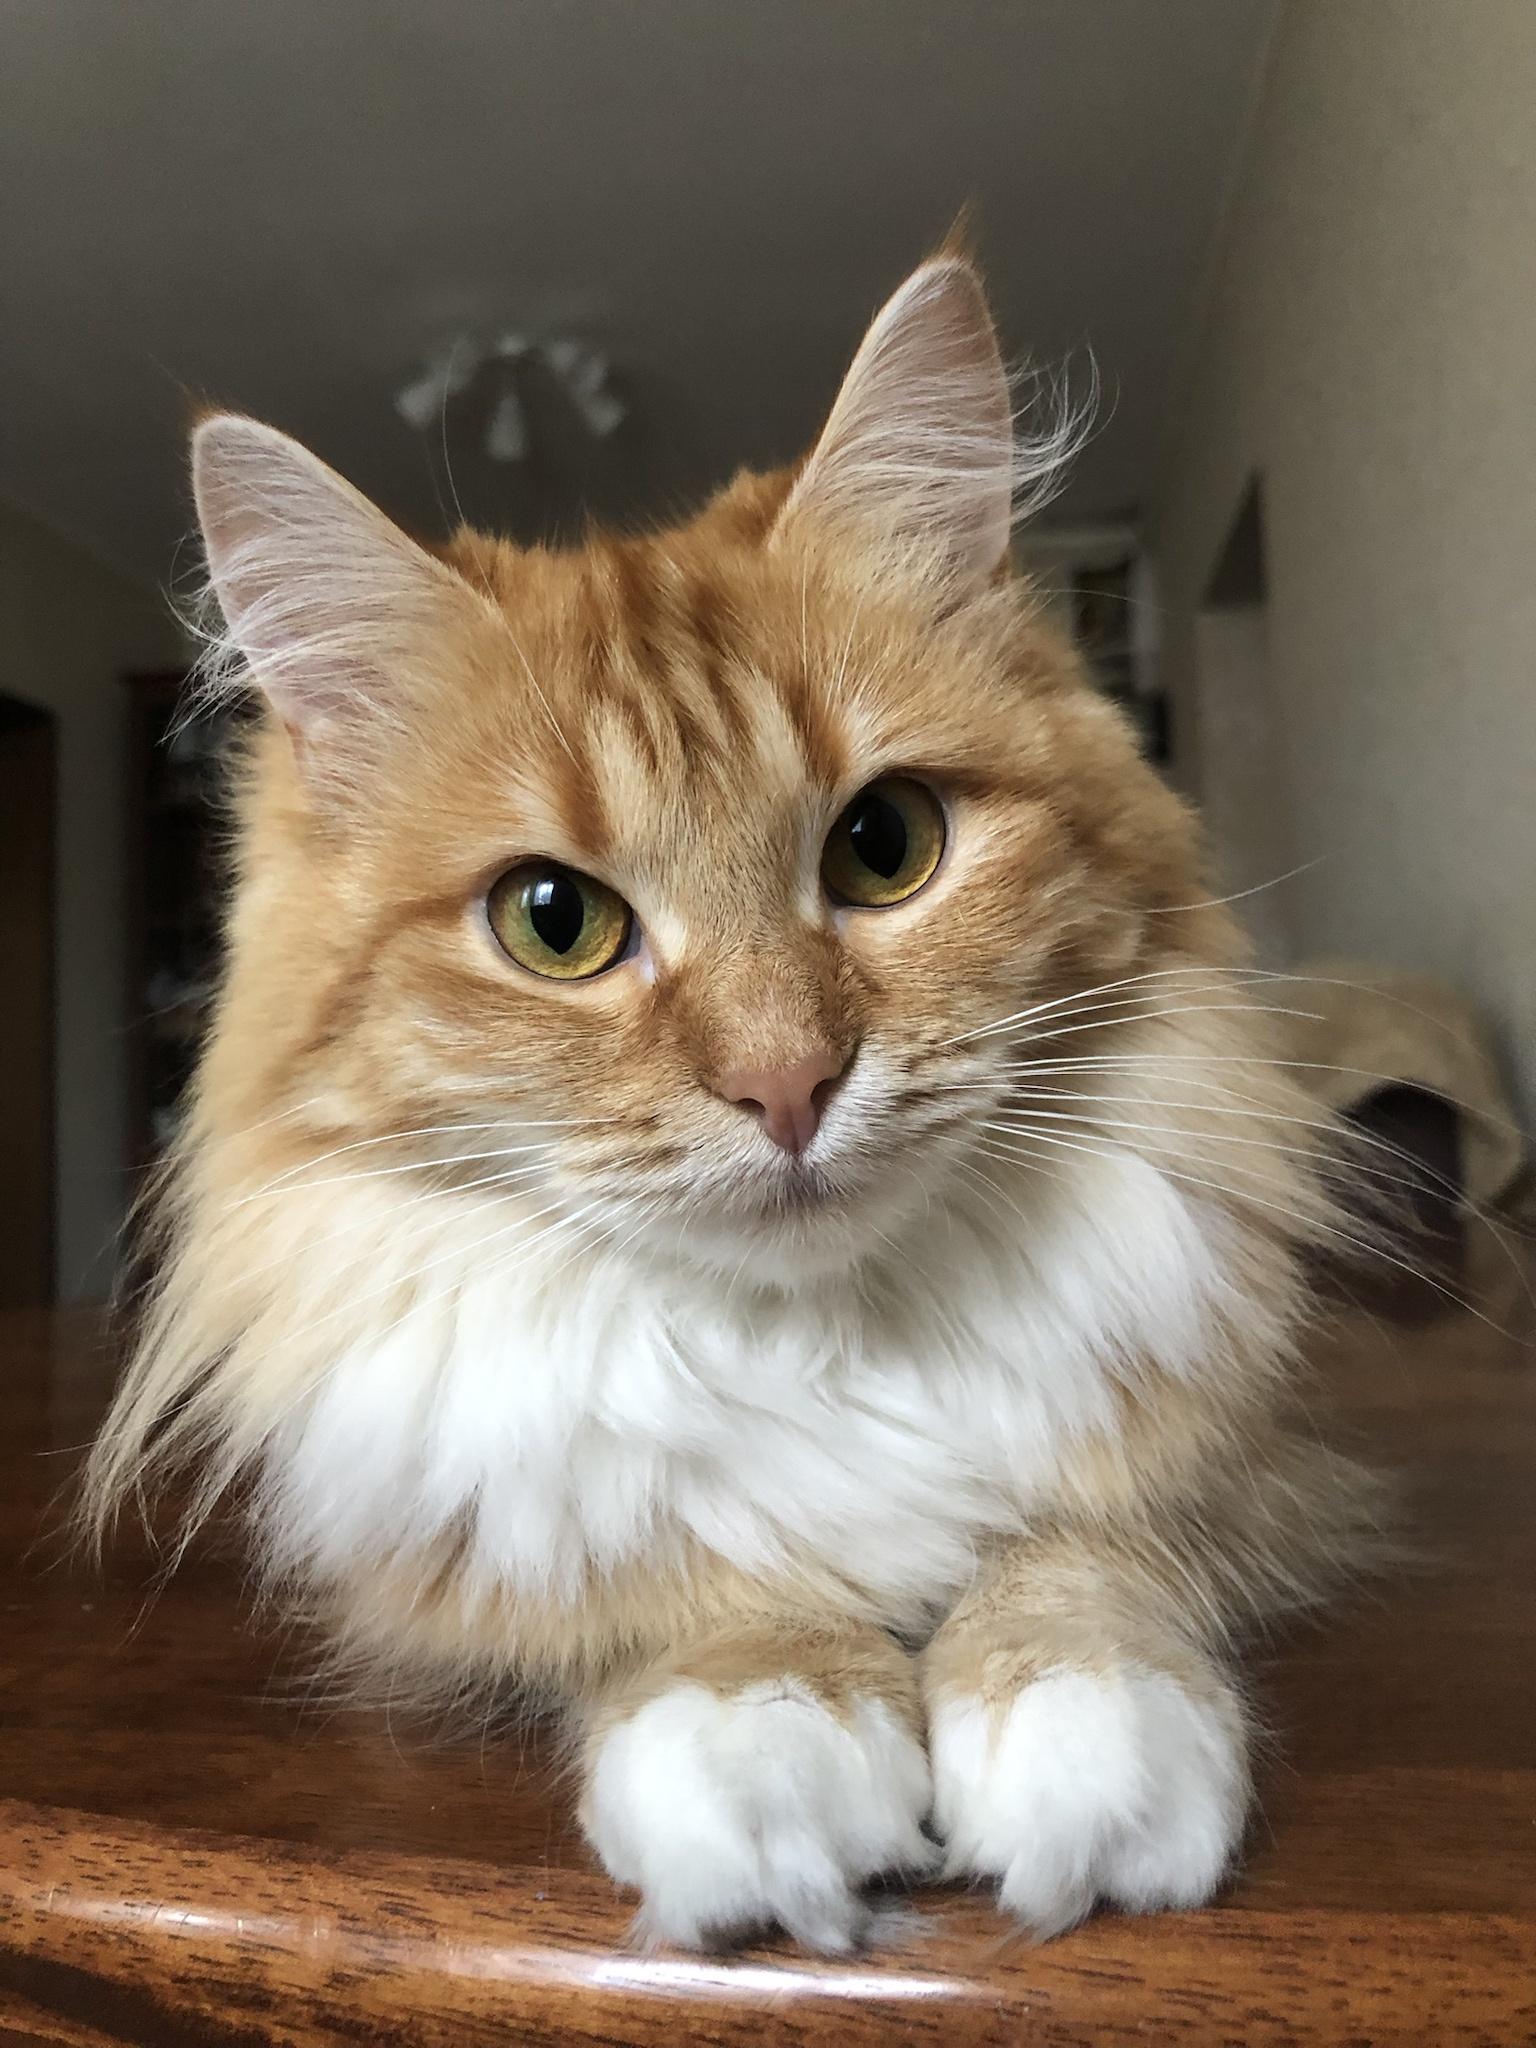 Vet said my cat is mix with a Maine coon. Is she glance like Maine coon?